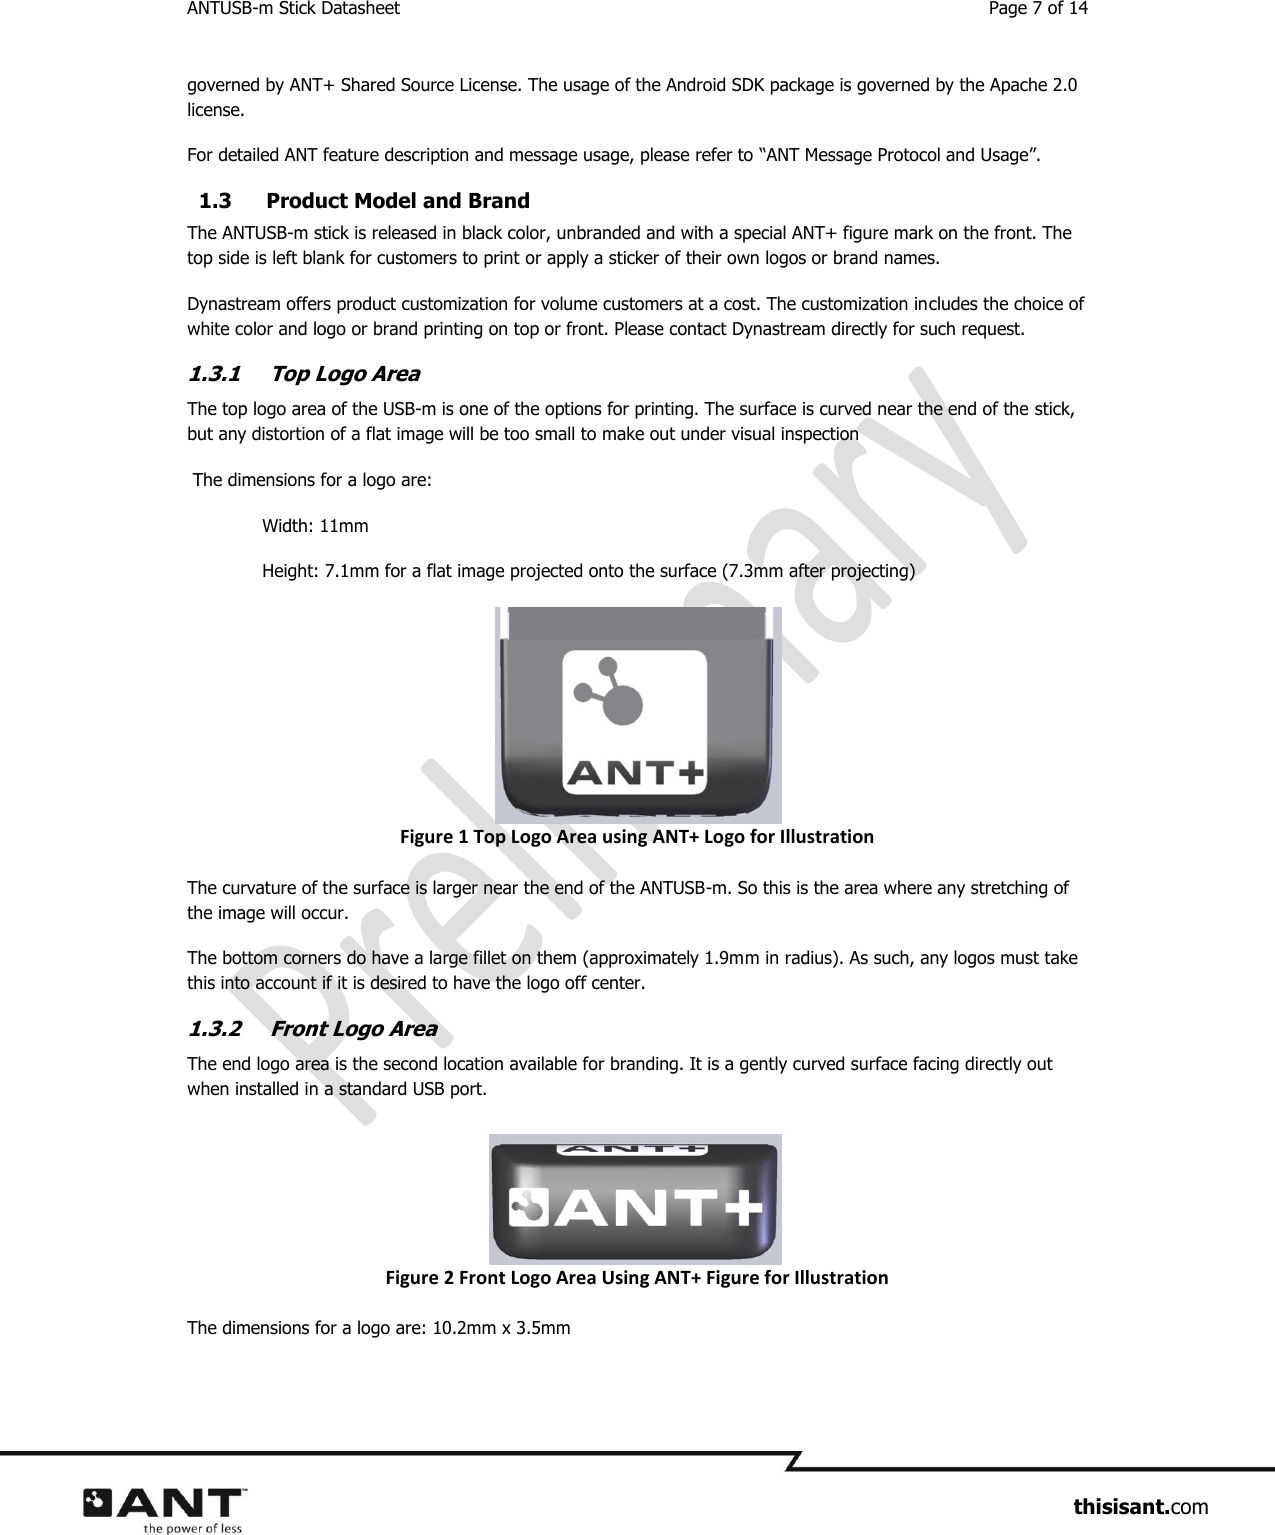 ANTUSB-m Stick Datasheet  Page 7 of 14                     thisisant.com governed by ANT+ Shared Source License. The usage of the Android SDK package is governed by the Apache 2.0 license.  For detailed ANT feature description and message usage, please refer to “ANT Message Protocol and Usage”. 1.3 Product Model and Brand The ANTUSB-m stick is released in black color, unbranded and with a special ANT+ figure mark on the front. The top side is left blank for customers to print or apply a sticker of their own logos or brand names.  Dynastream offers product customization for volume customers at a cost. The customization includes the choice of white color and logo or brand printing on top or front. Please contact Dynastream directly for such request.  1.3.1 Top Logo Area The top logo area of the USB-m is one of the options for printing. The surface is curved near the end of the stick, but any distortion of a flat image will be too small to make out under visual inspection  The dimensions for a logo are:   Width: 11mm   Height: 7.1mm for a flat image projected onto the surface (7.3mm after projecting) Figure 1 Top Logo Area using ANT+ Logo for Illustration The curvature of the surface is larger near the end of the ANTUSB-m. So this is the area where any stretching of the image will occur.  The bottom corners do have a large fillet on them (approximately 1.9mm in radius). As such, any logos must take this into account if it is desired to have the logo off center.  1.3.2 Front Logo Area The end logo area is the second location available for branding. It is a gently curved surface facing directly out when installed in a standard USB port. Figure 2 Front Logo Area Using ANT+ Figure for Illustration The dimensions for a logo are: 10.2mm x 3.5mm 